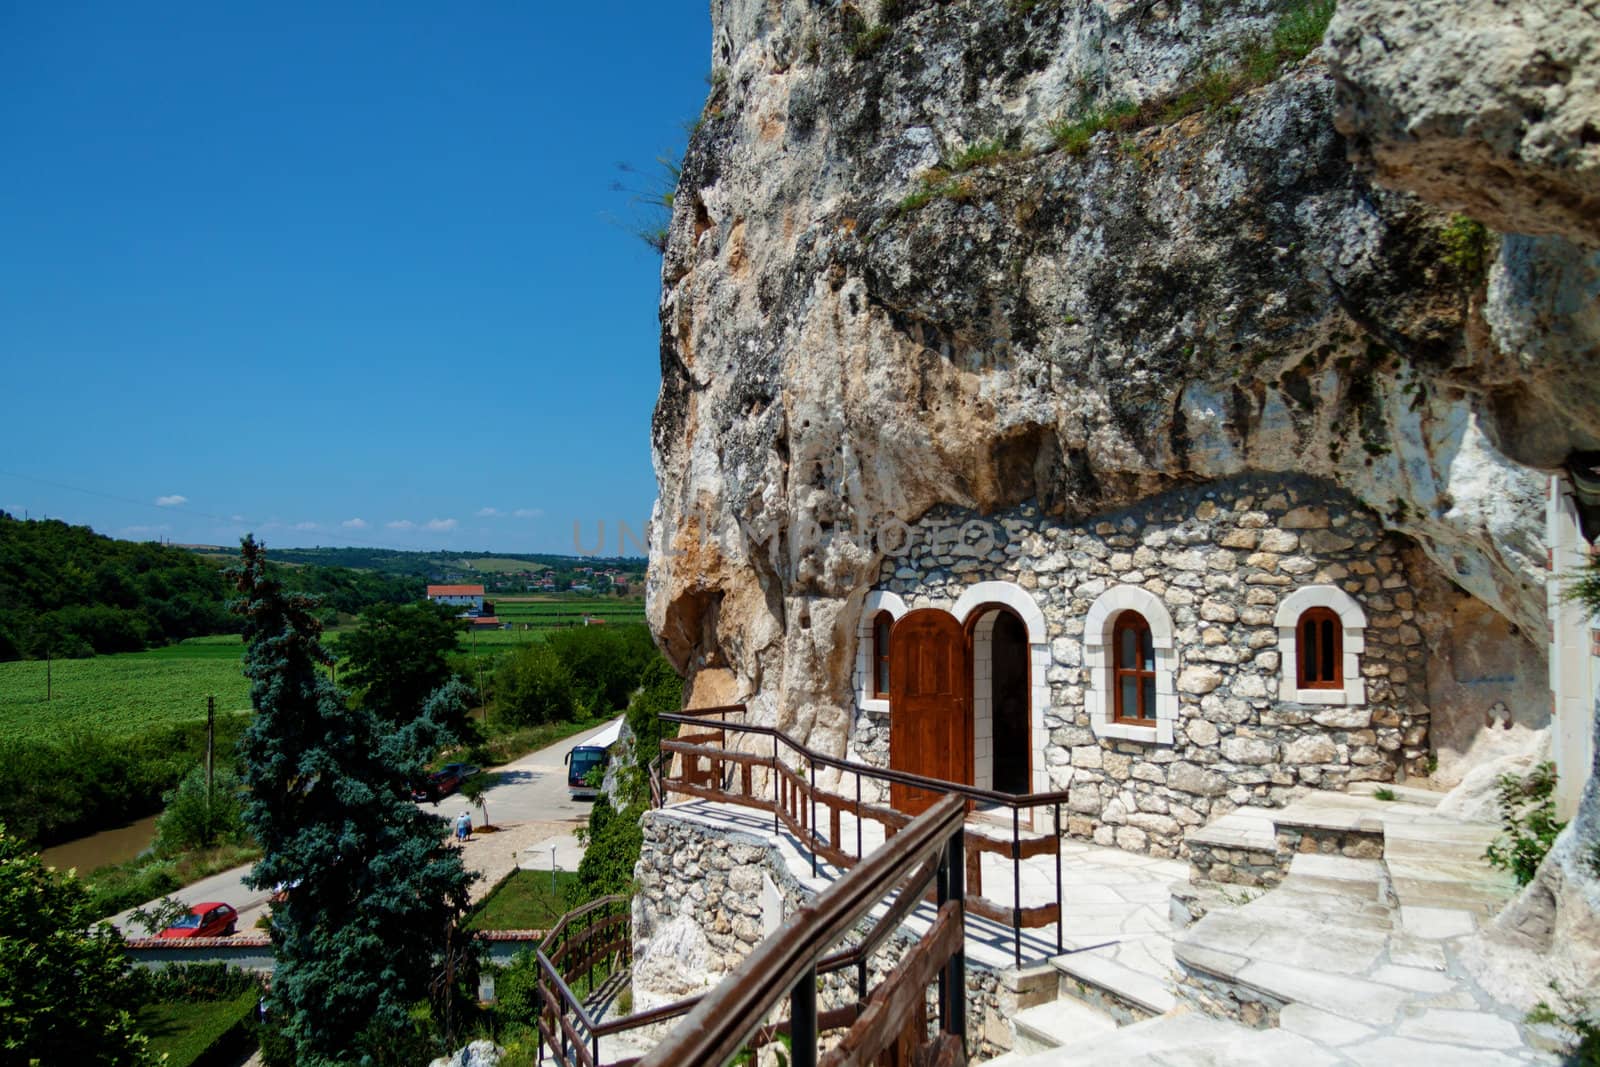 Orthodox monastery excavated in the rocks view from above by Lamarinx